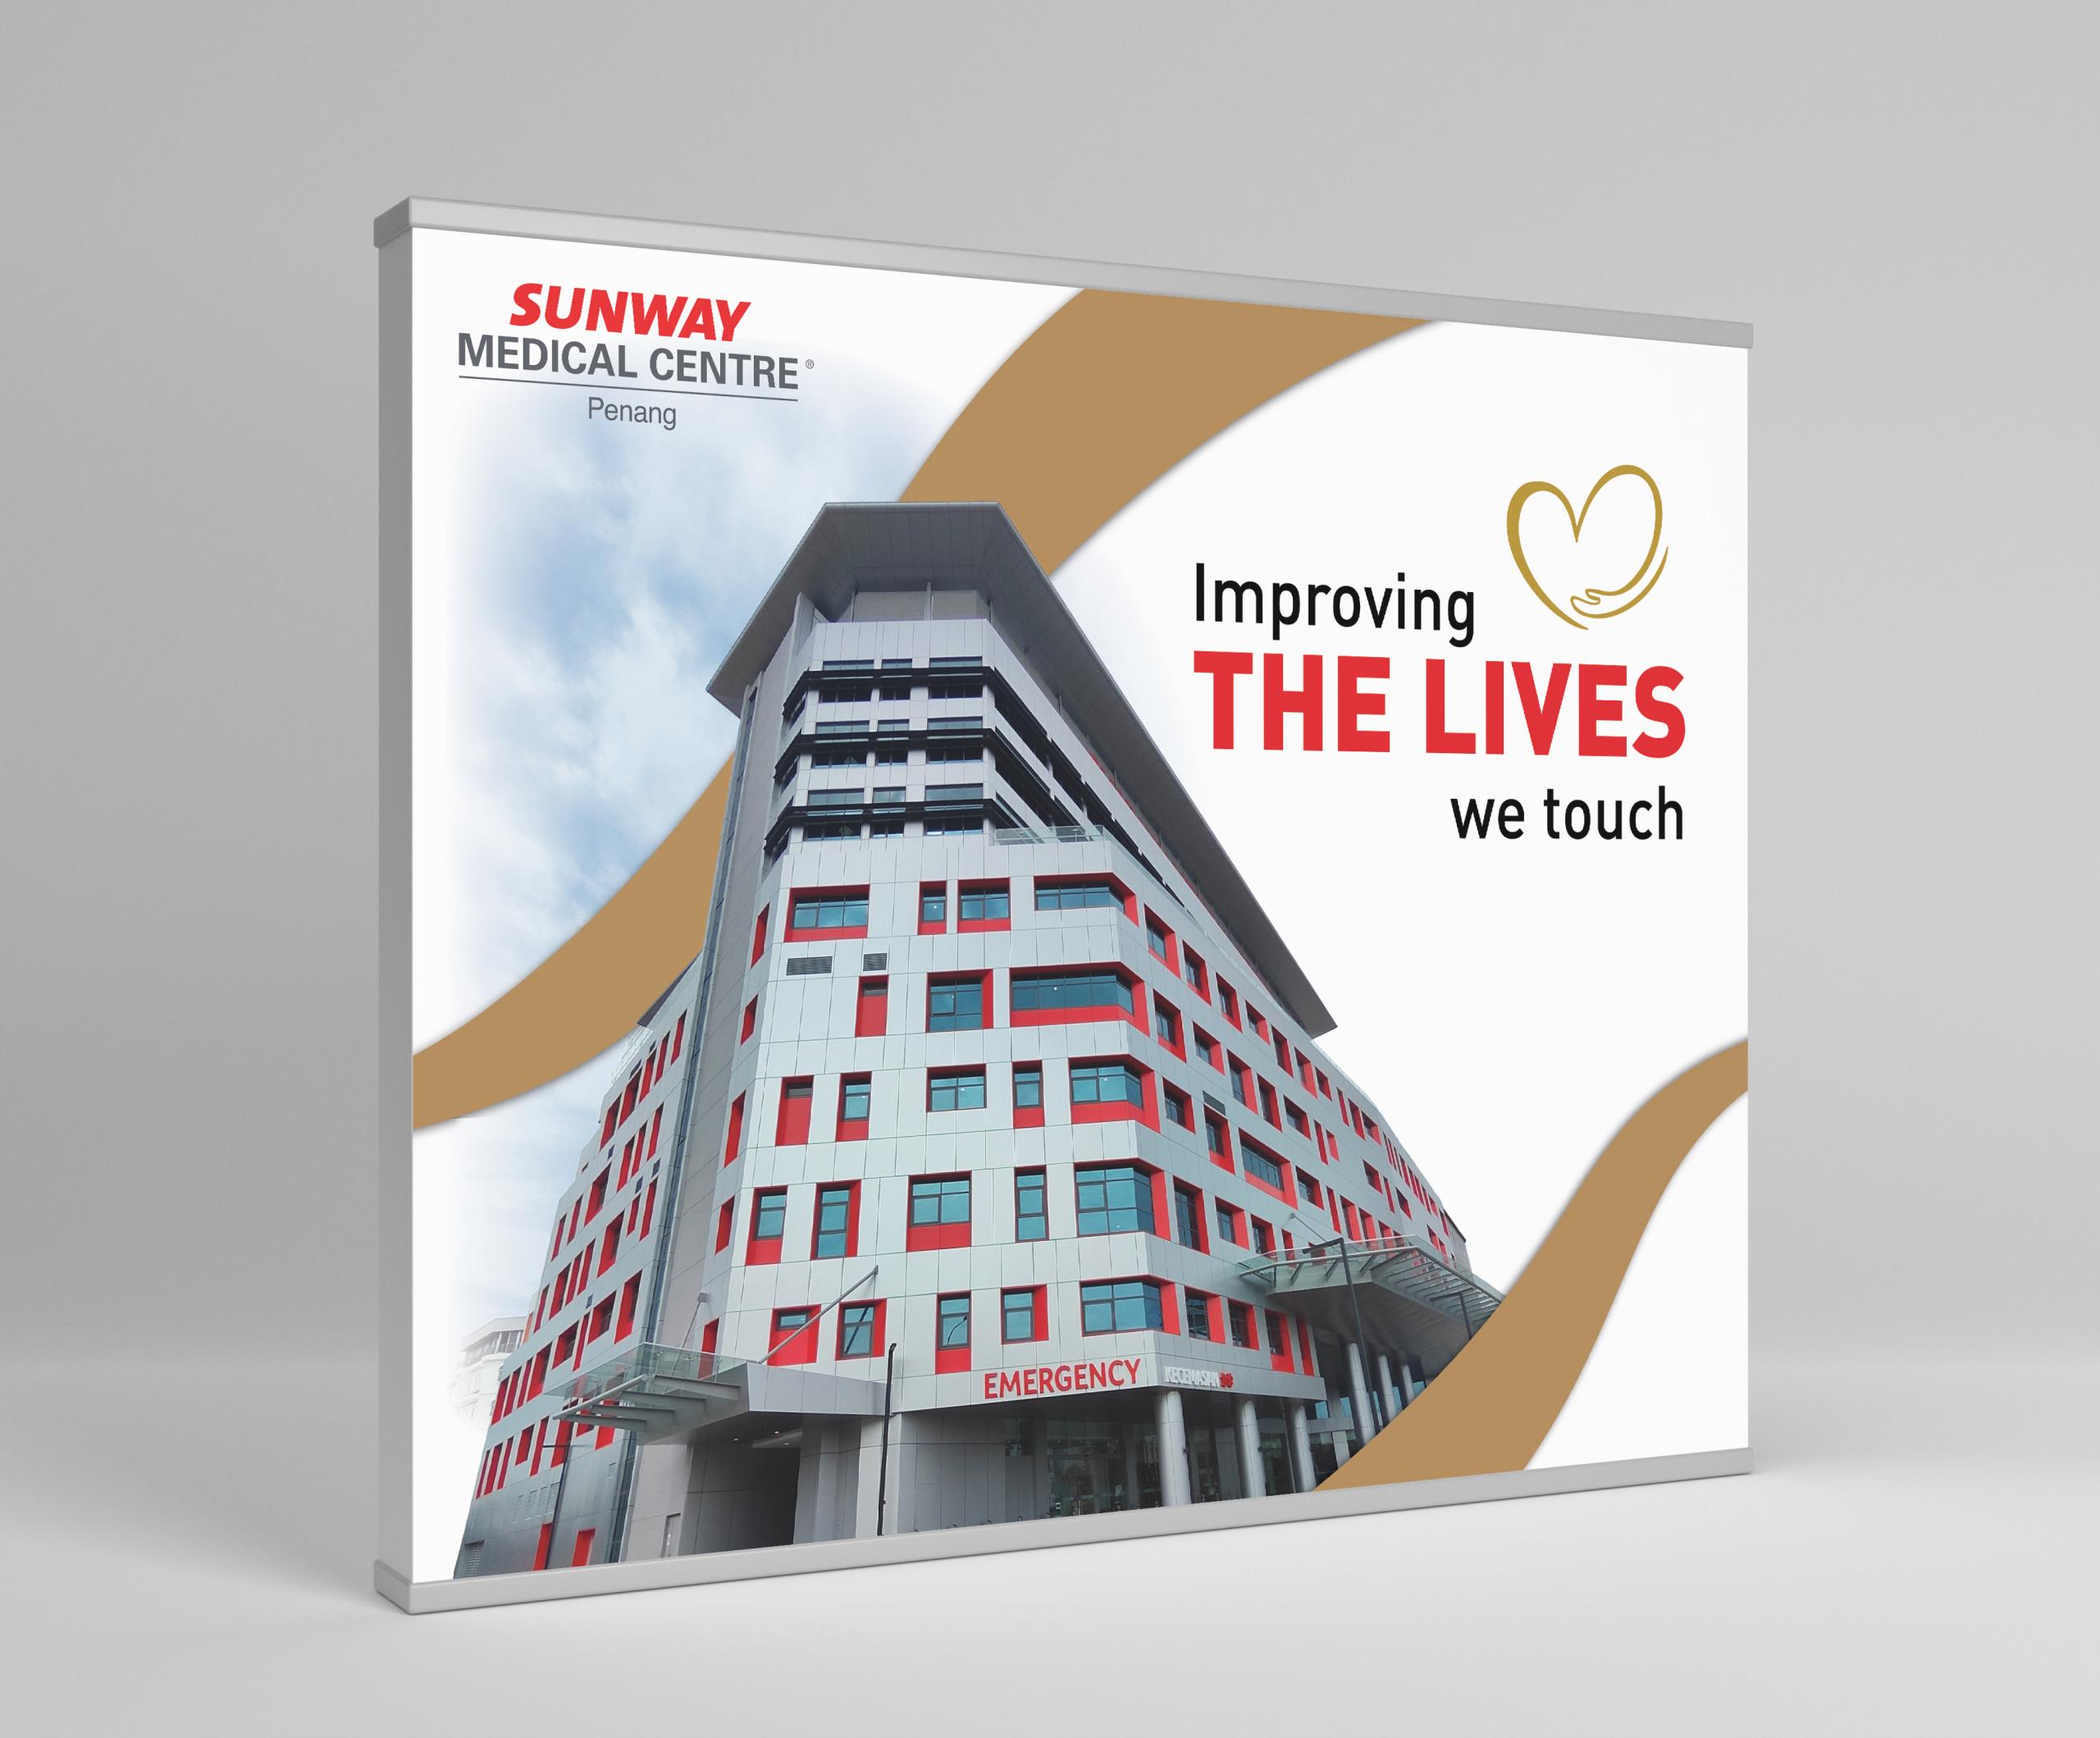 Signage mockup for Sunway Medical Centre Penang with text 'improving the lives we touch'